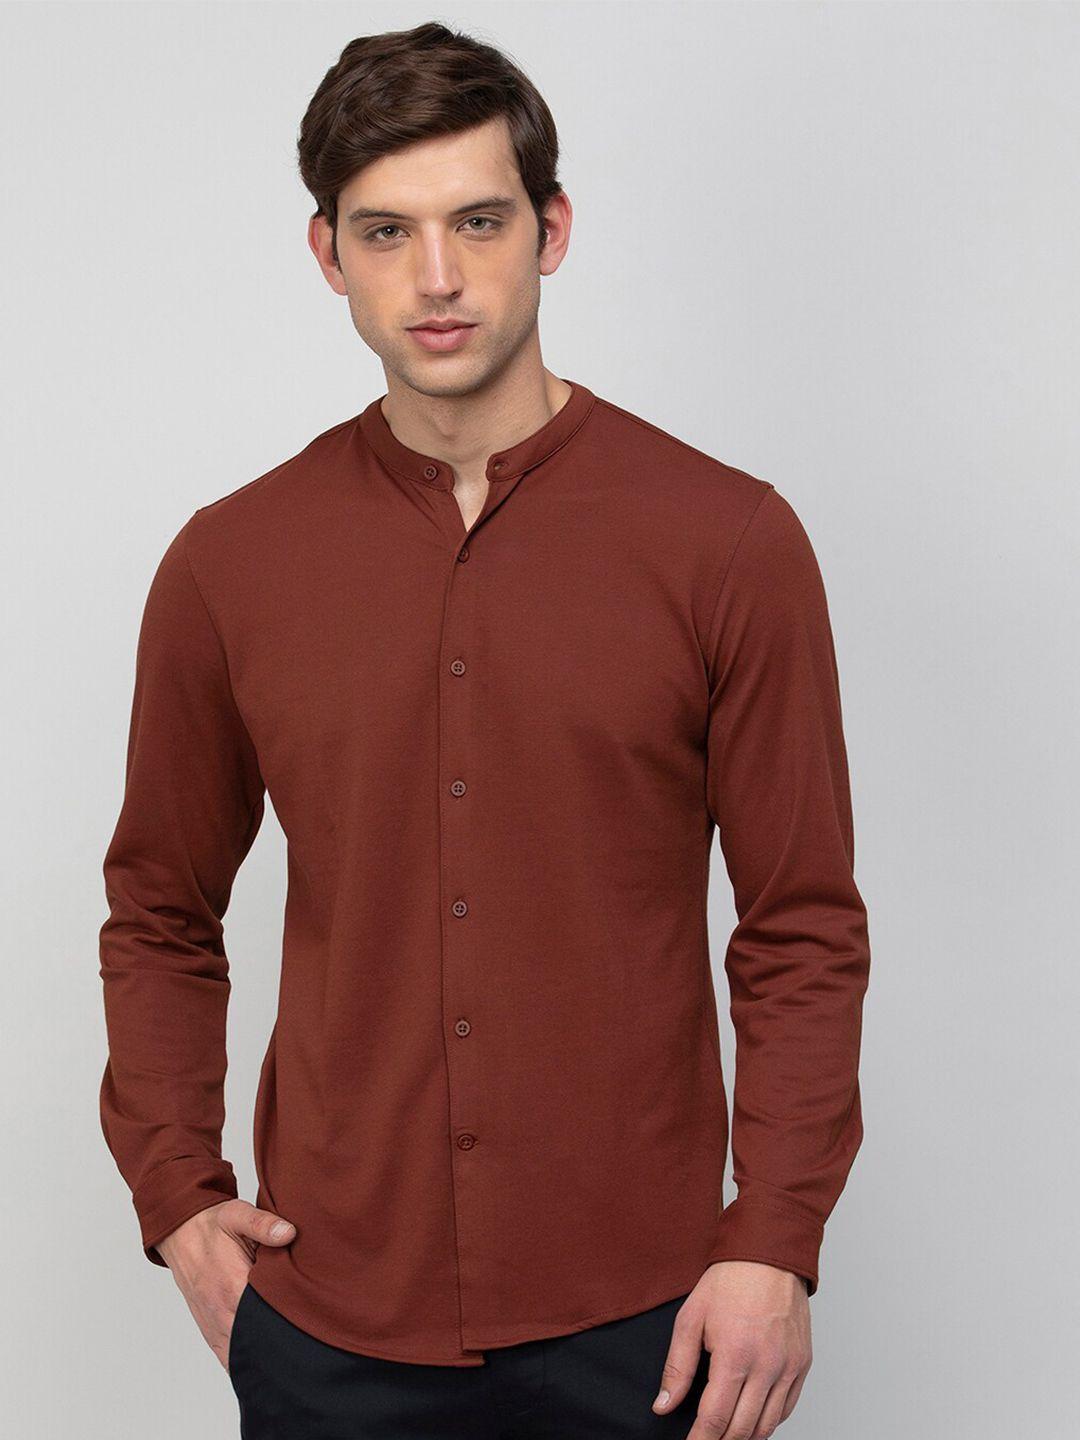 code-by-lifestyle-men-casual-cotton-shirt